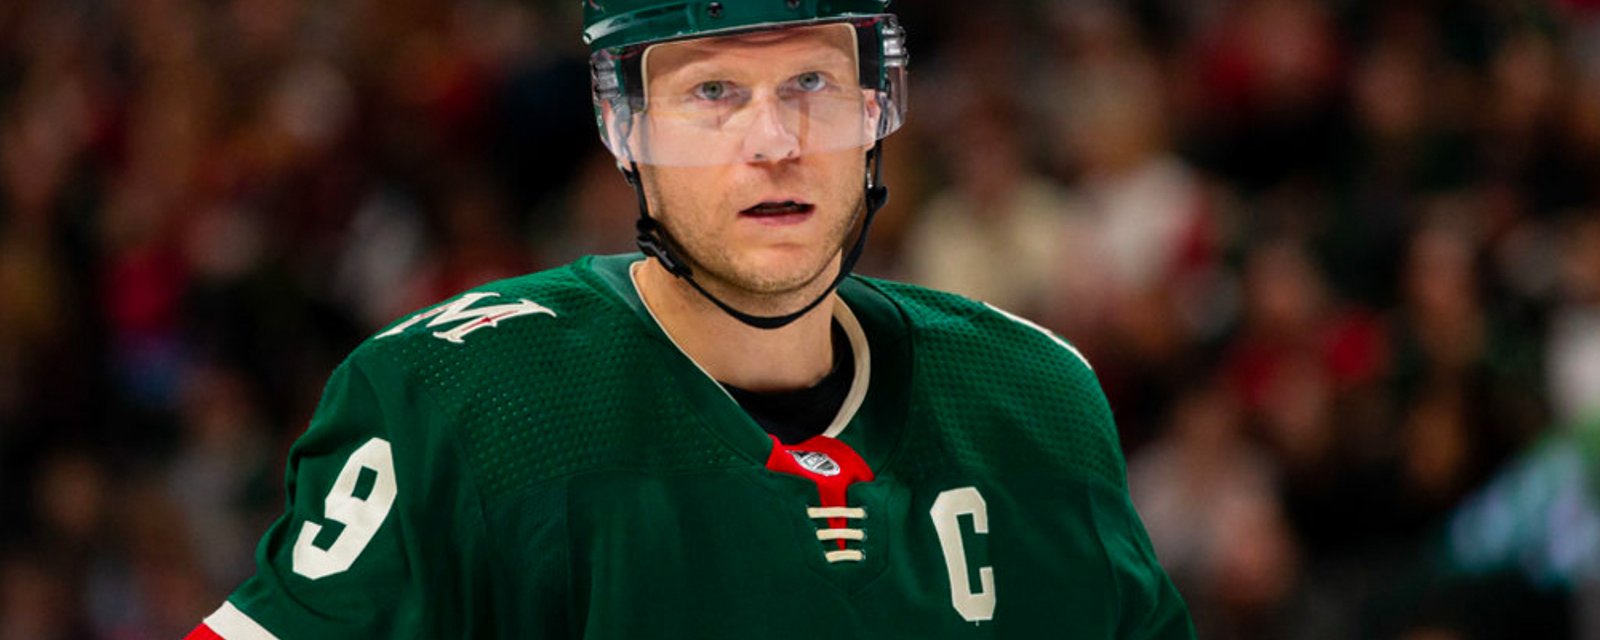 Mikko Koivu is finally replaced as the Wild's captain